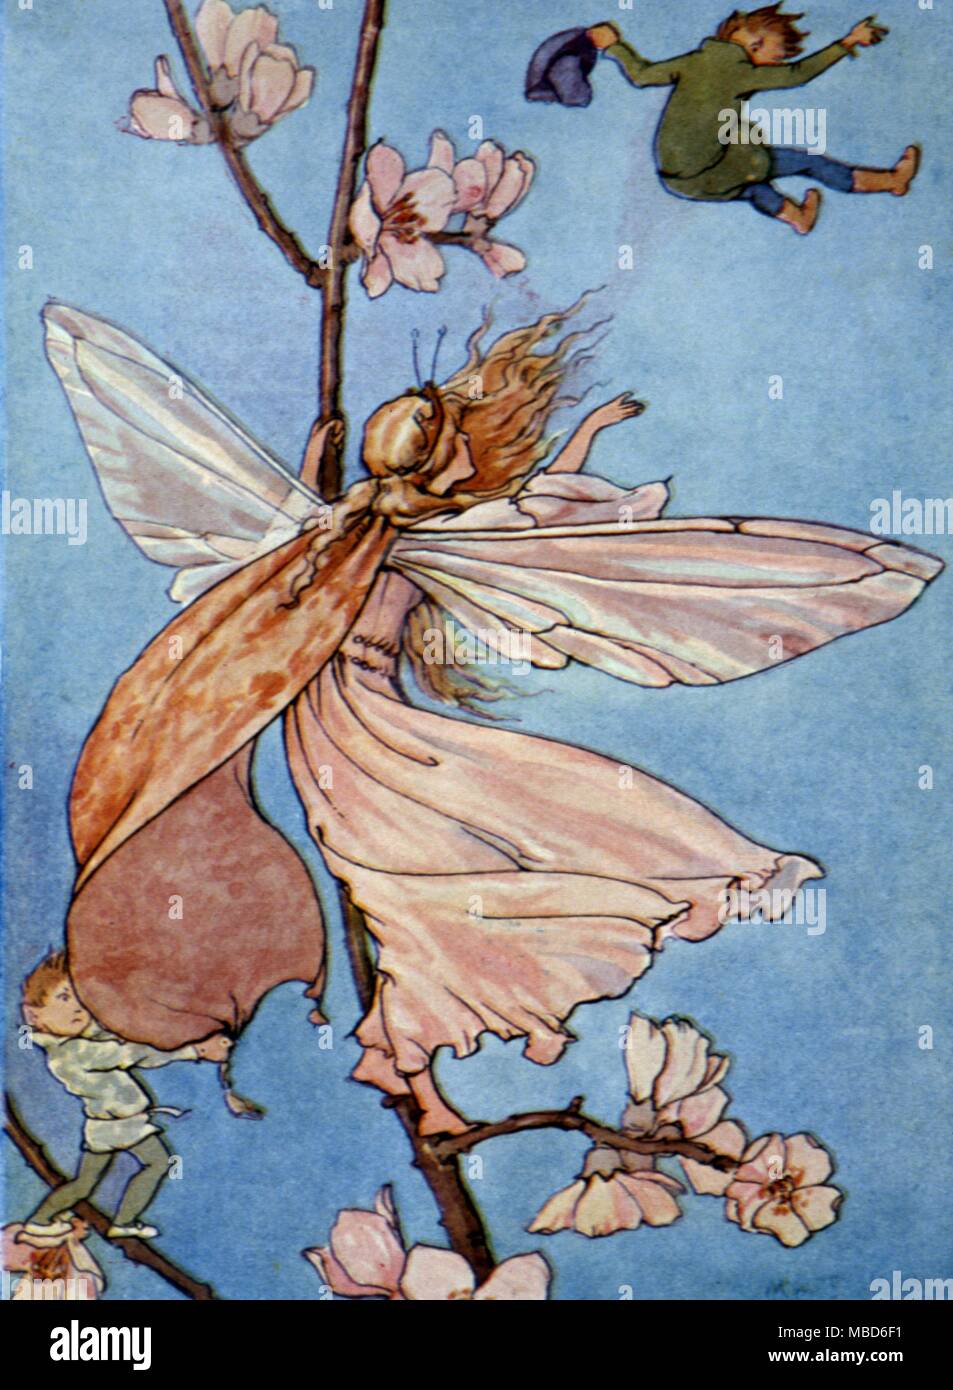 Fairy Tales - Tom Thumb The Queen and the Fairies sent him flying. Illustration by Margaret W Tarrant for Fairy Tales, nd, but circa 1920 Stock Photo